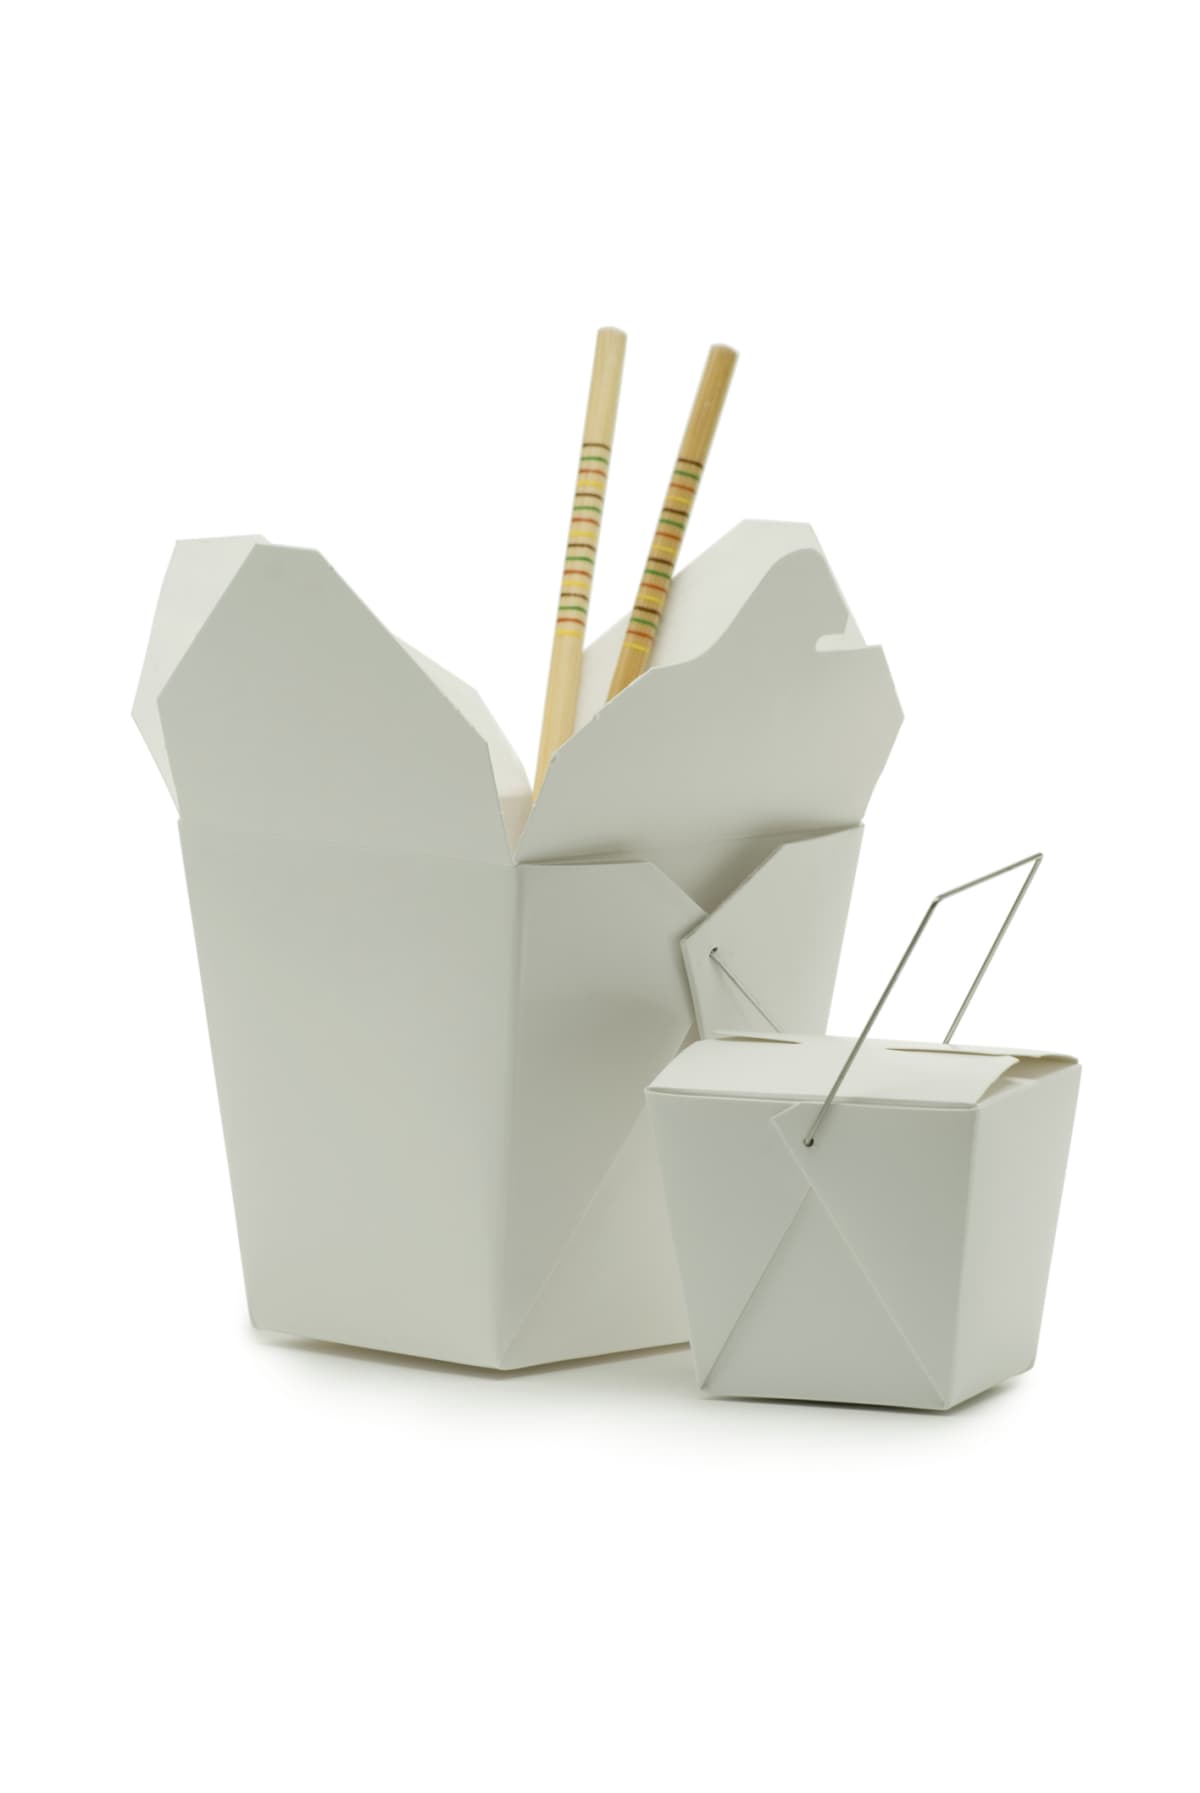 Two sizes of asian-style carryout containers and a pair of chopstick shot on white